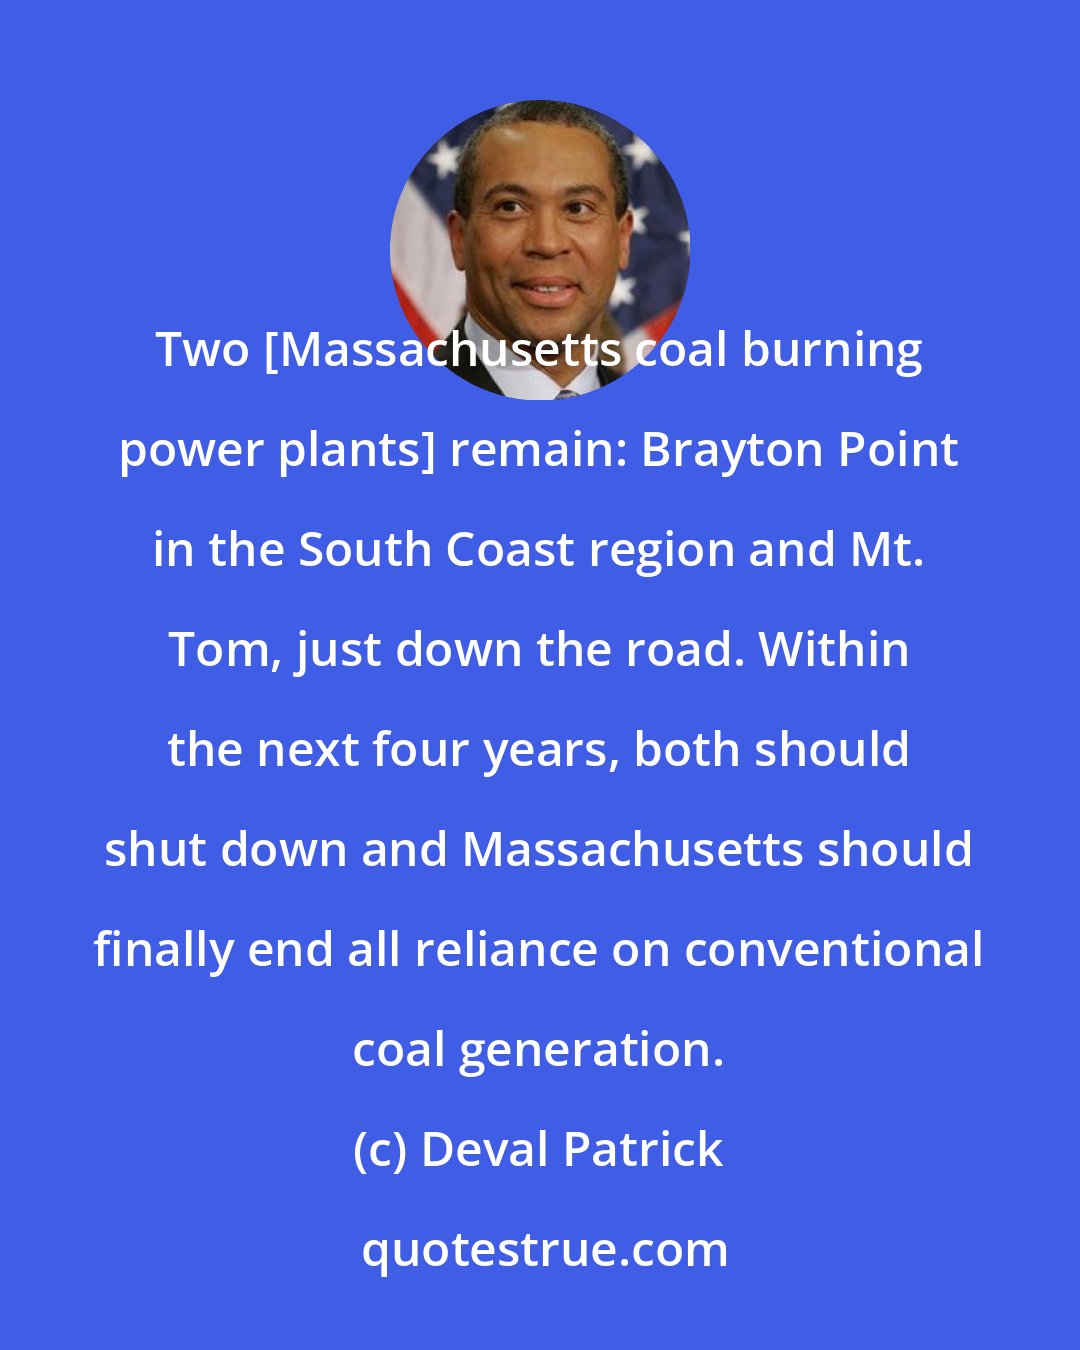 Deval Patrick: Two [Massachusetts coal burning power plants] remain: Brayton Point in the South Coast region and Mt. Tom, just down the road. Within the next four years, both should shut down and Massachusetts should finally end all reliance on conventional coal generation.